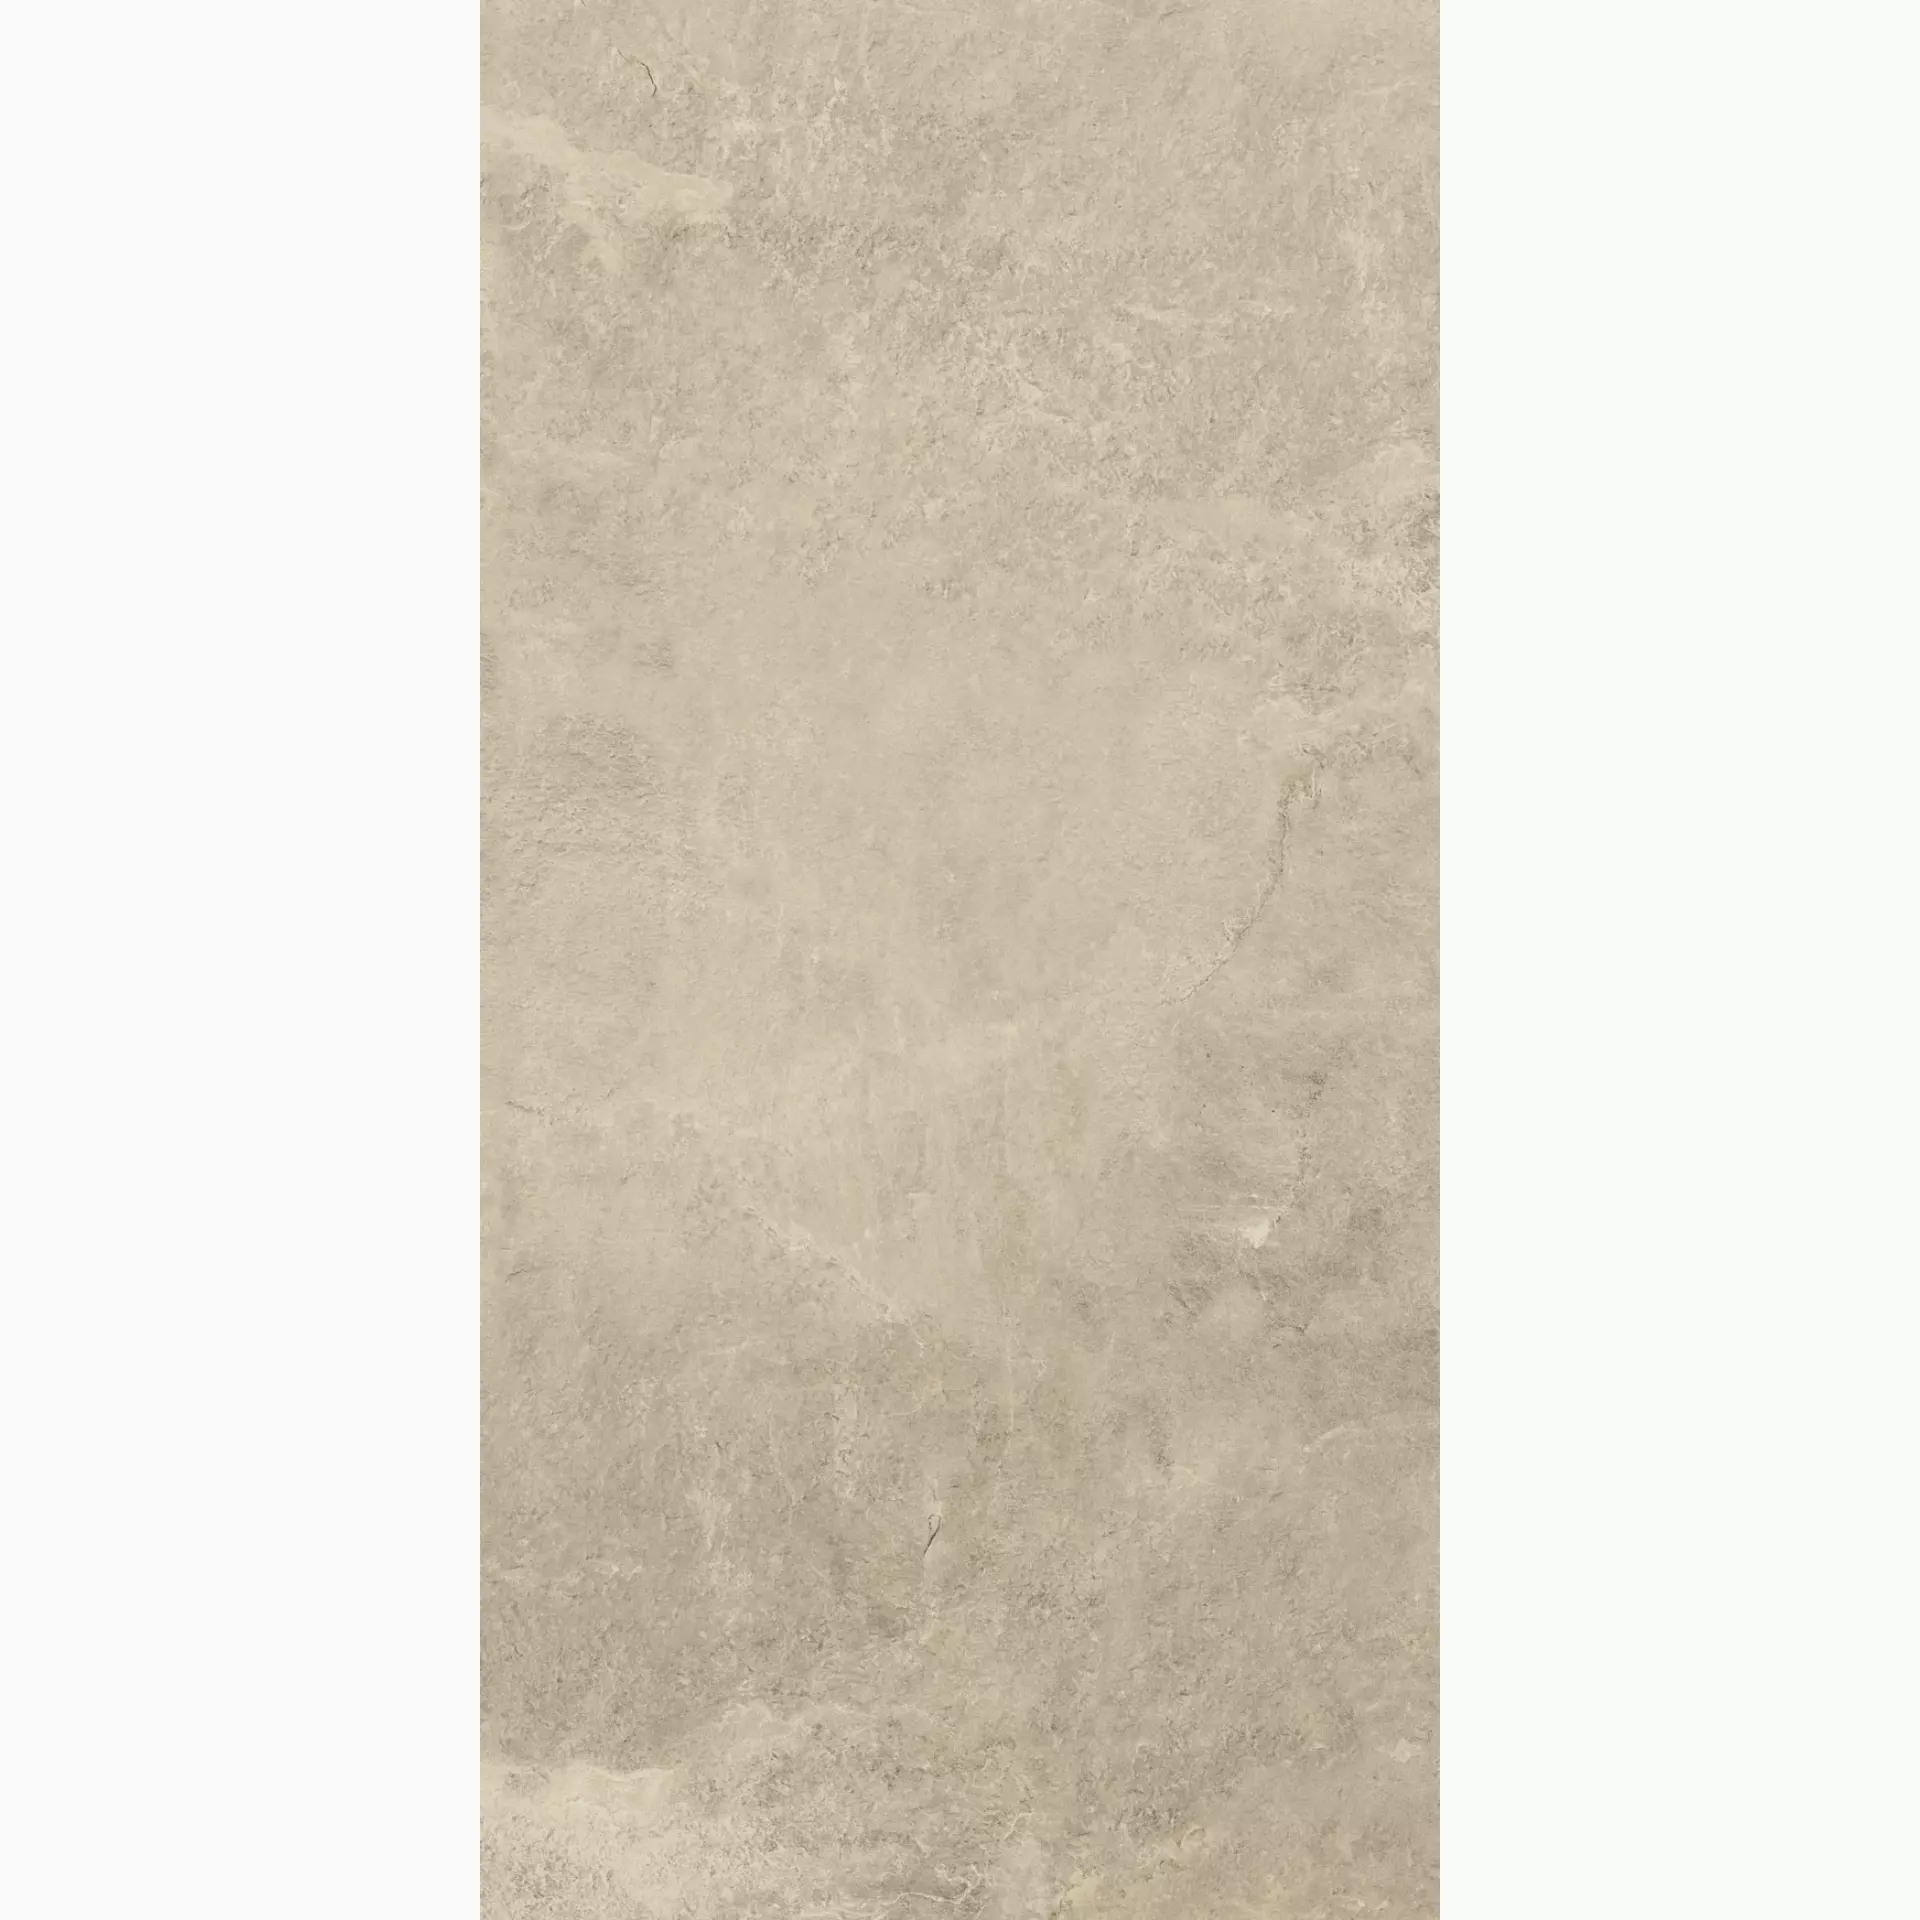 Keope Extreme Beige Strutturato 424E5931 45x90cm rectified 20mm